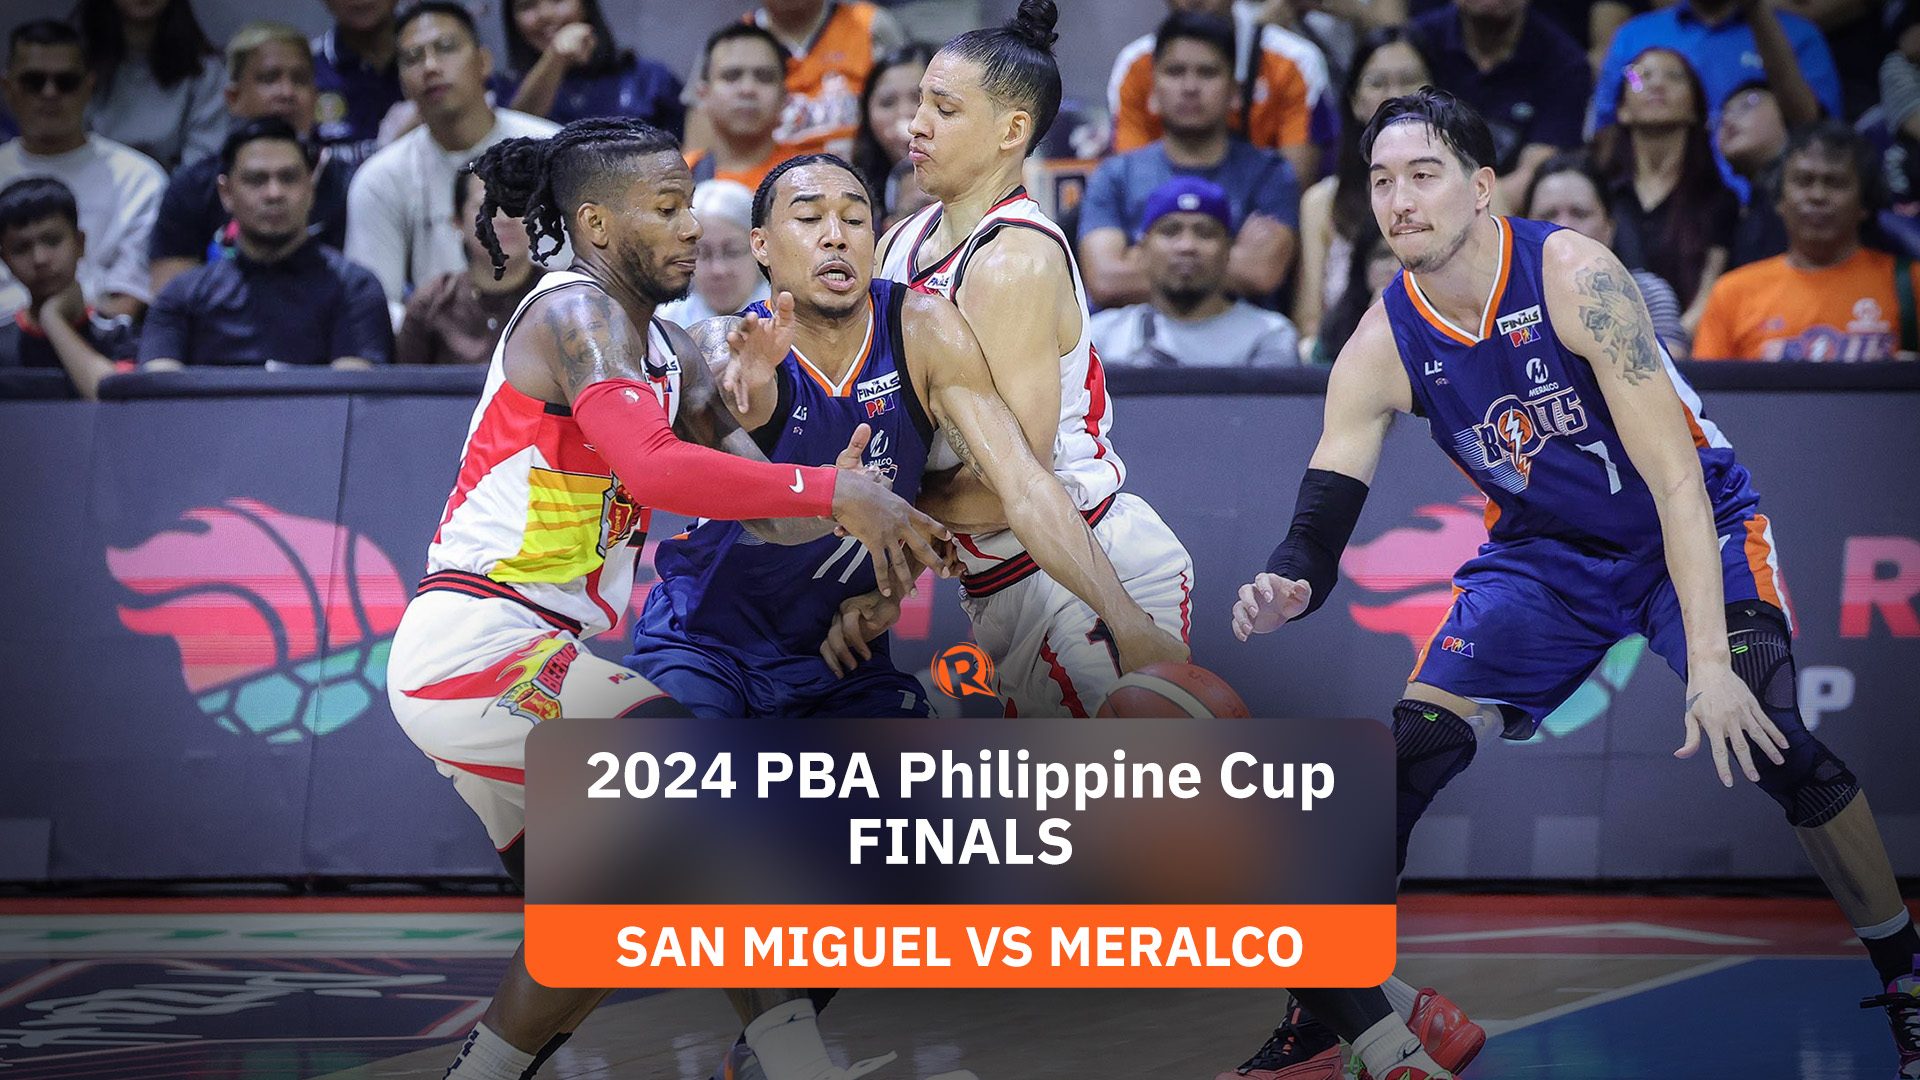 Newsome shines late as Meralco escapes San Miguel in Game 3 thriller